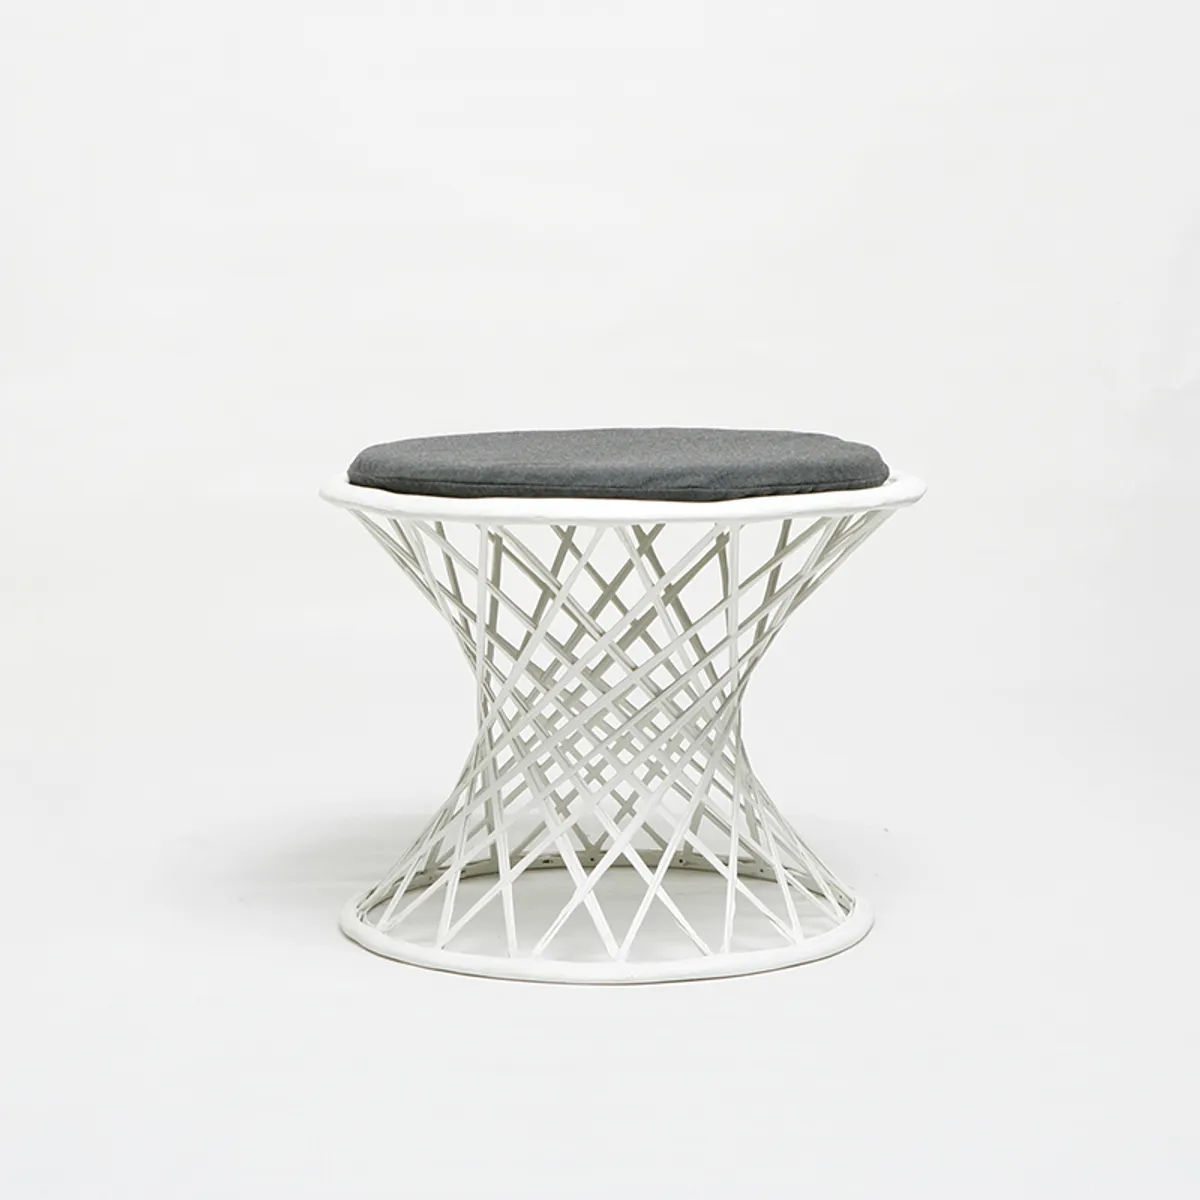 Cacti White Stool Outdoor Furniture For Hotels Spas And Healthcare By Insideoutcontracts